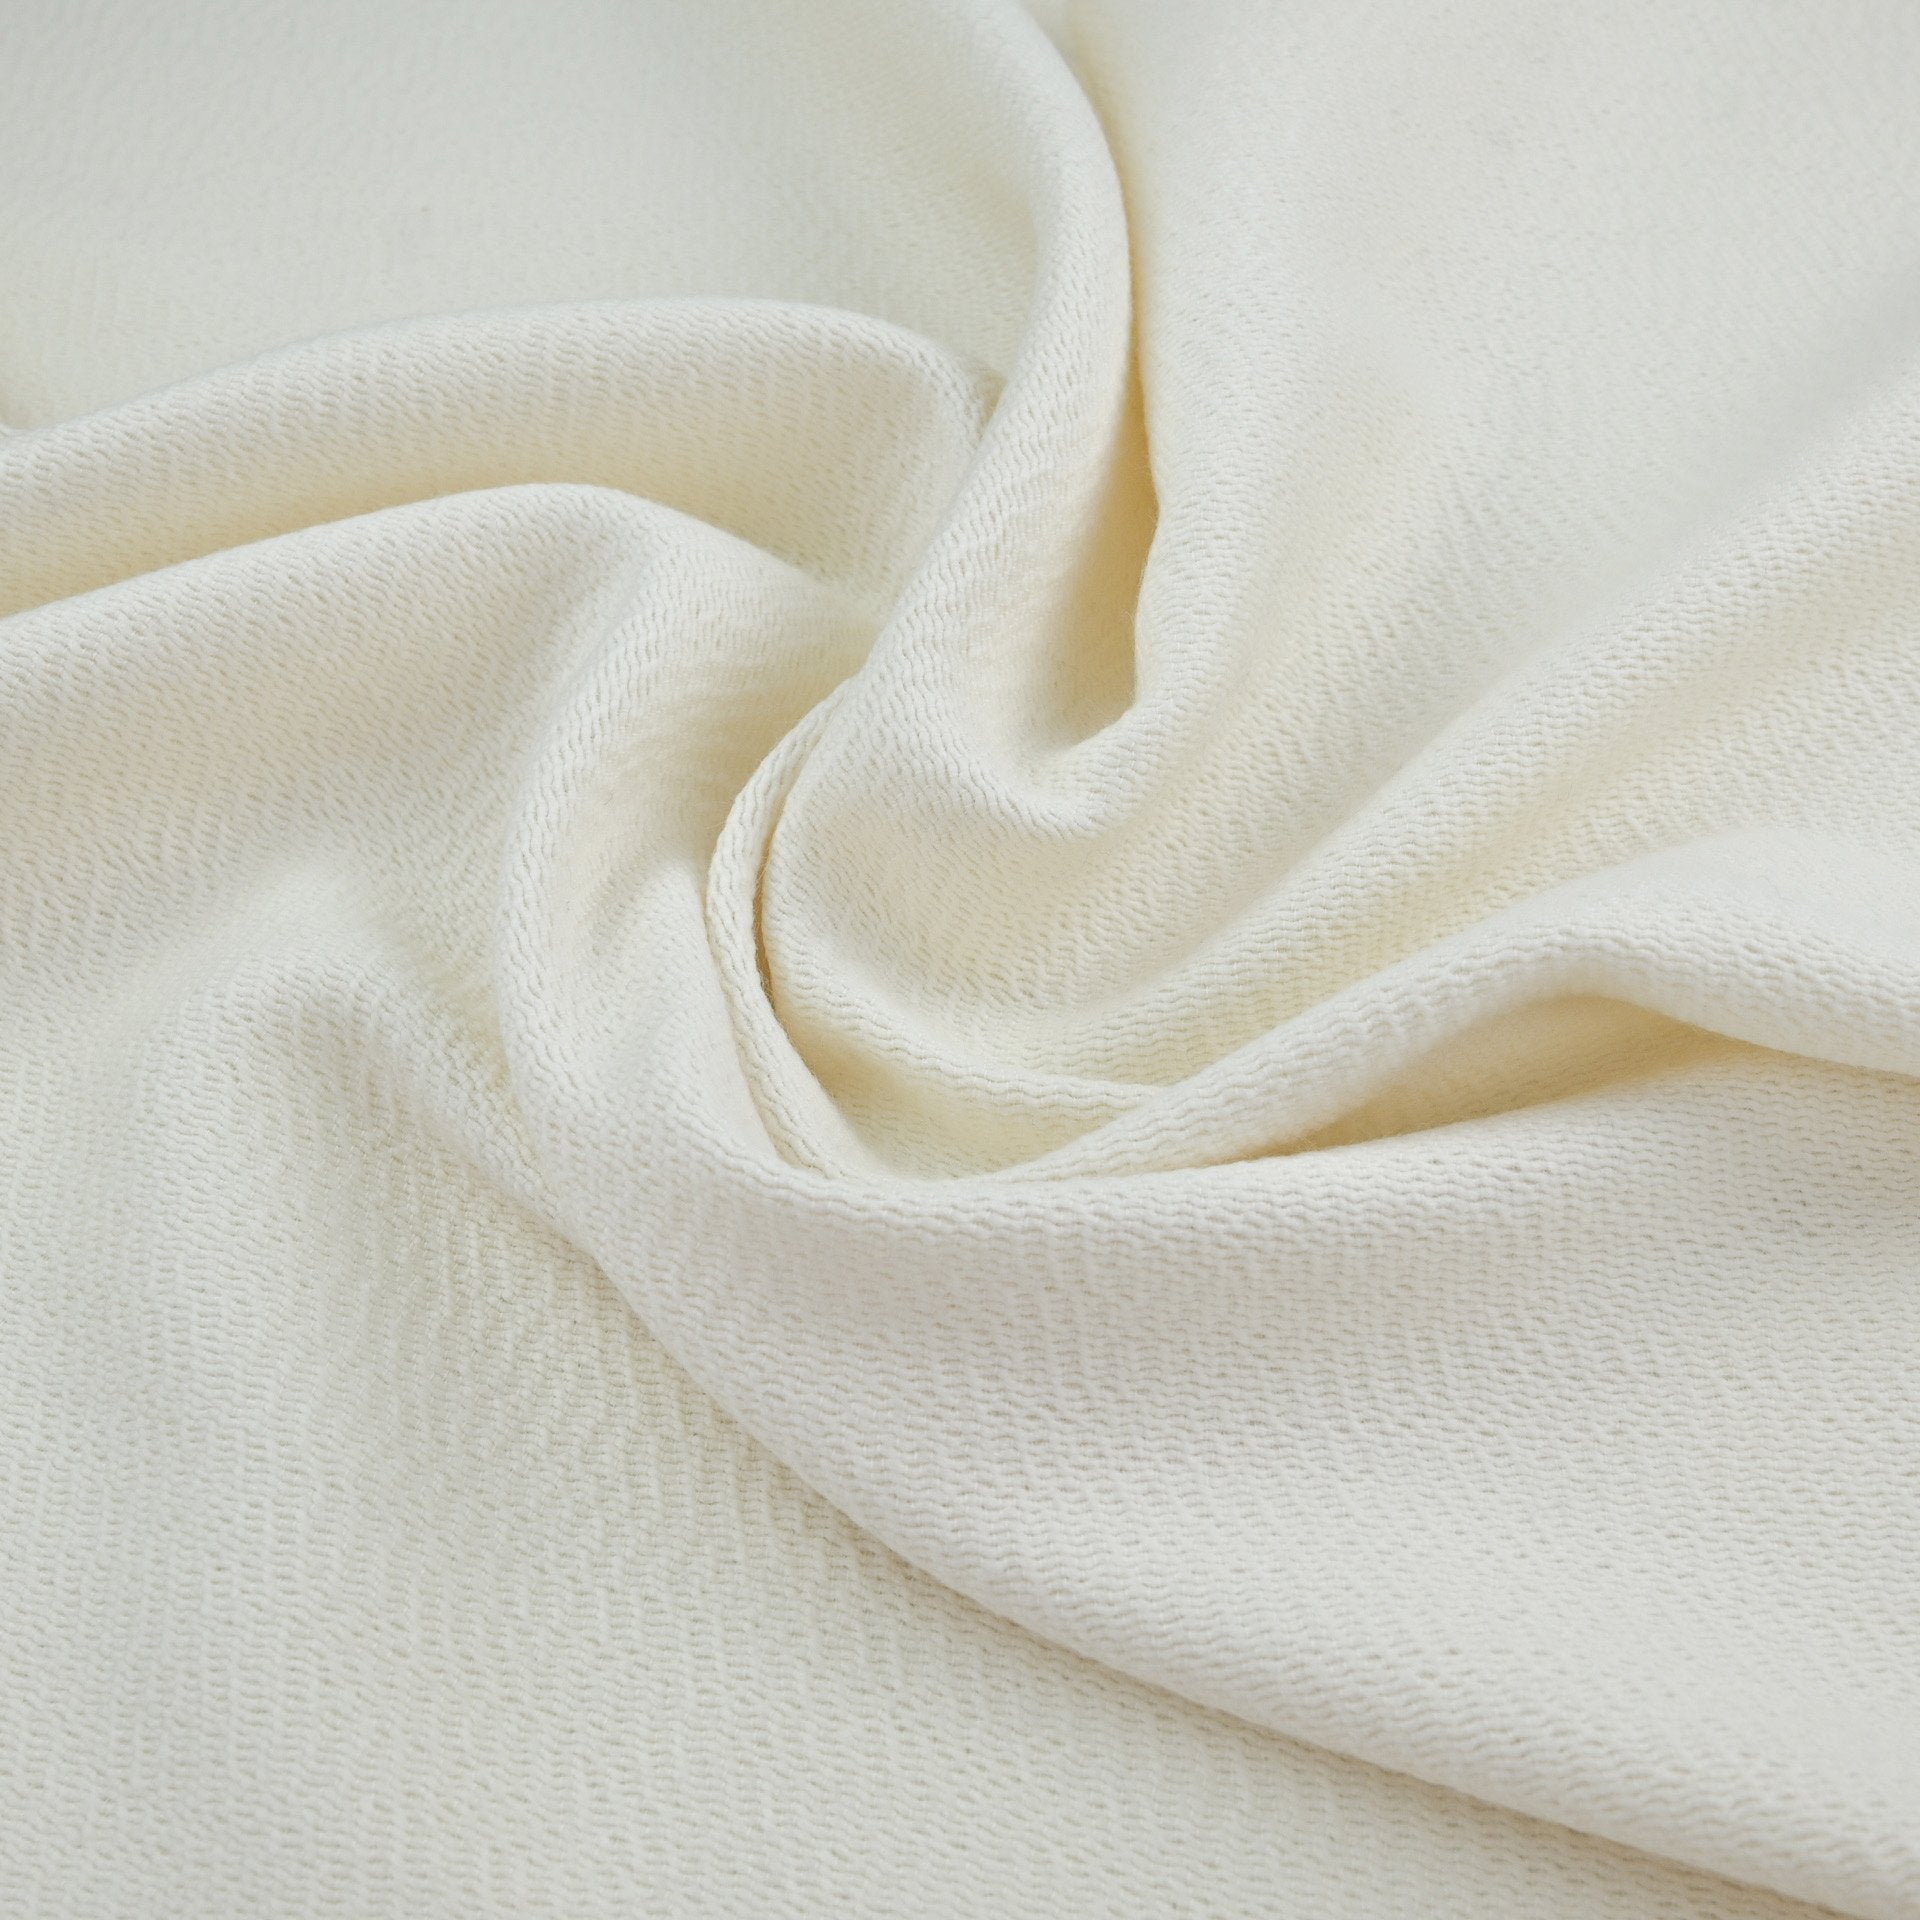 Off-White Textured Wool Fabric 96878